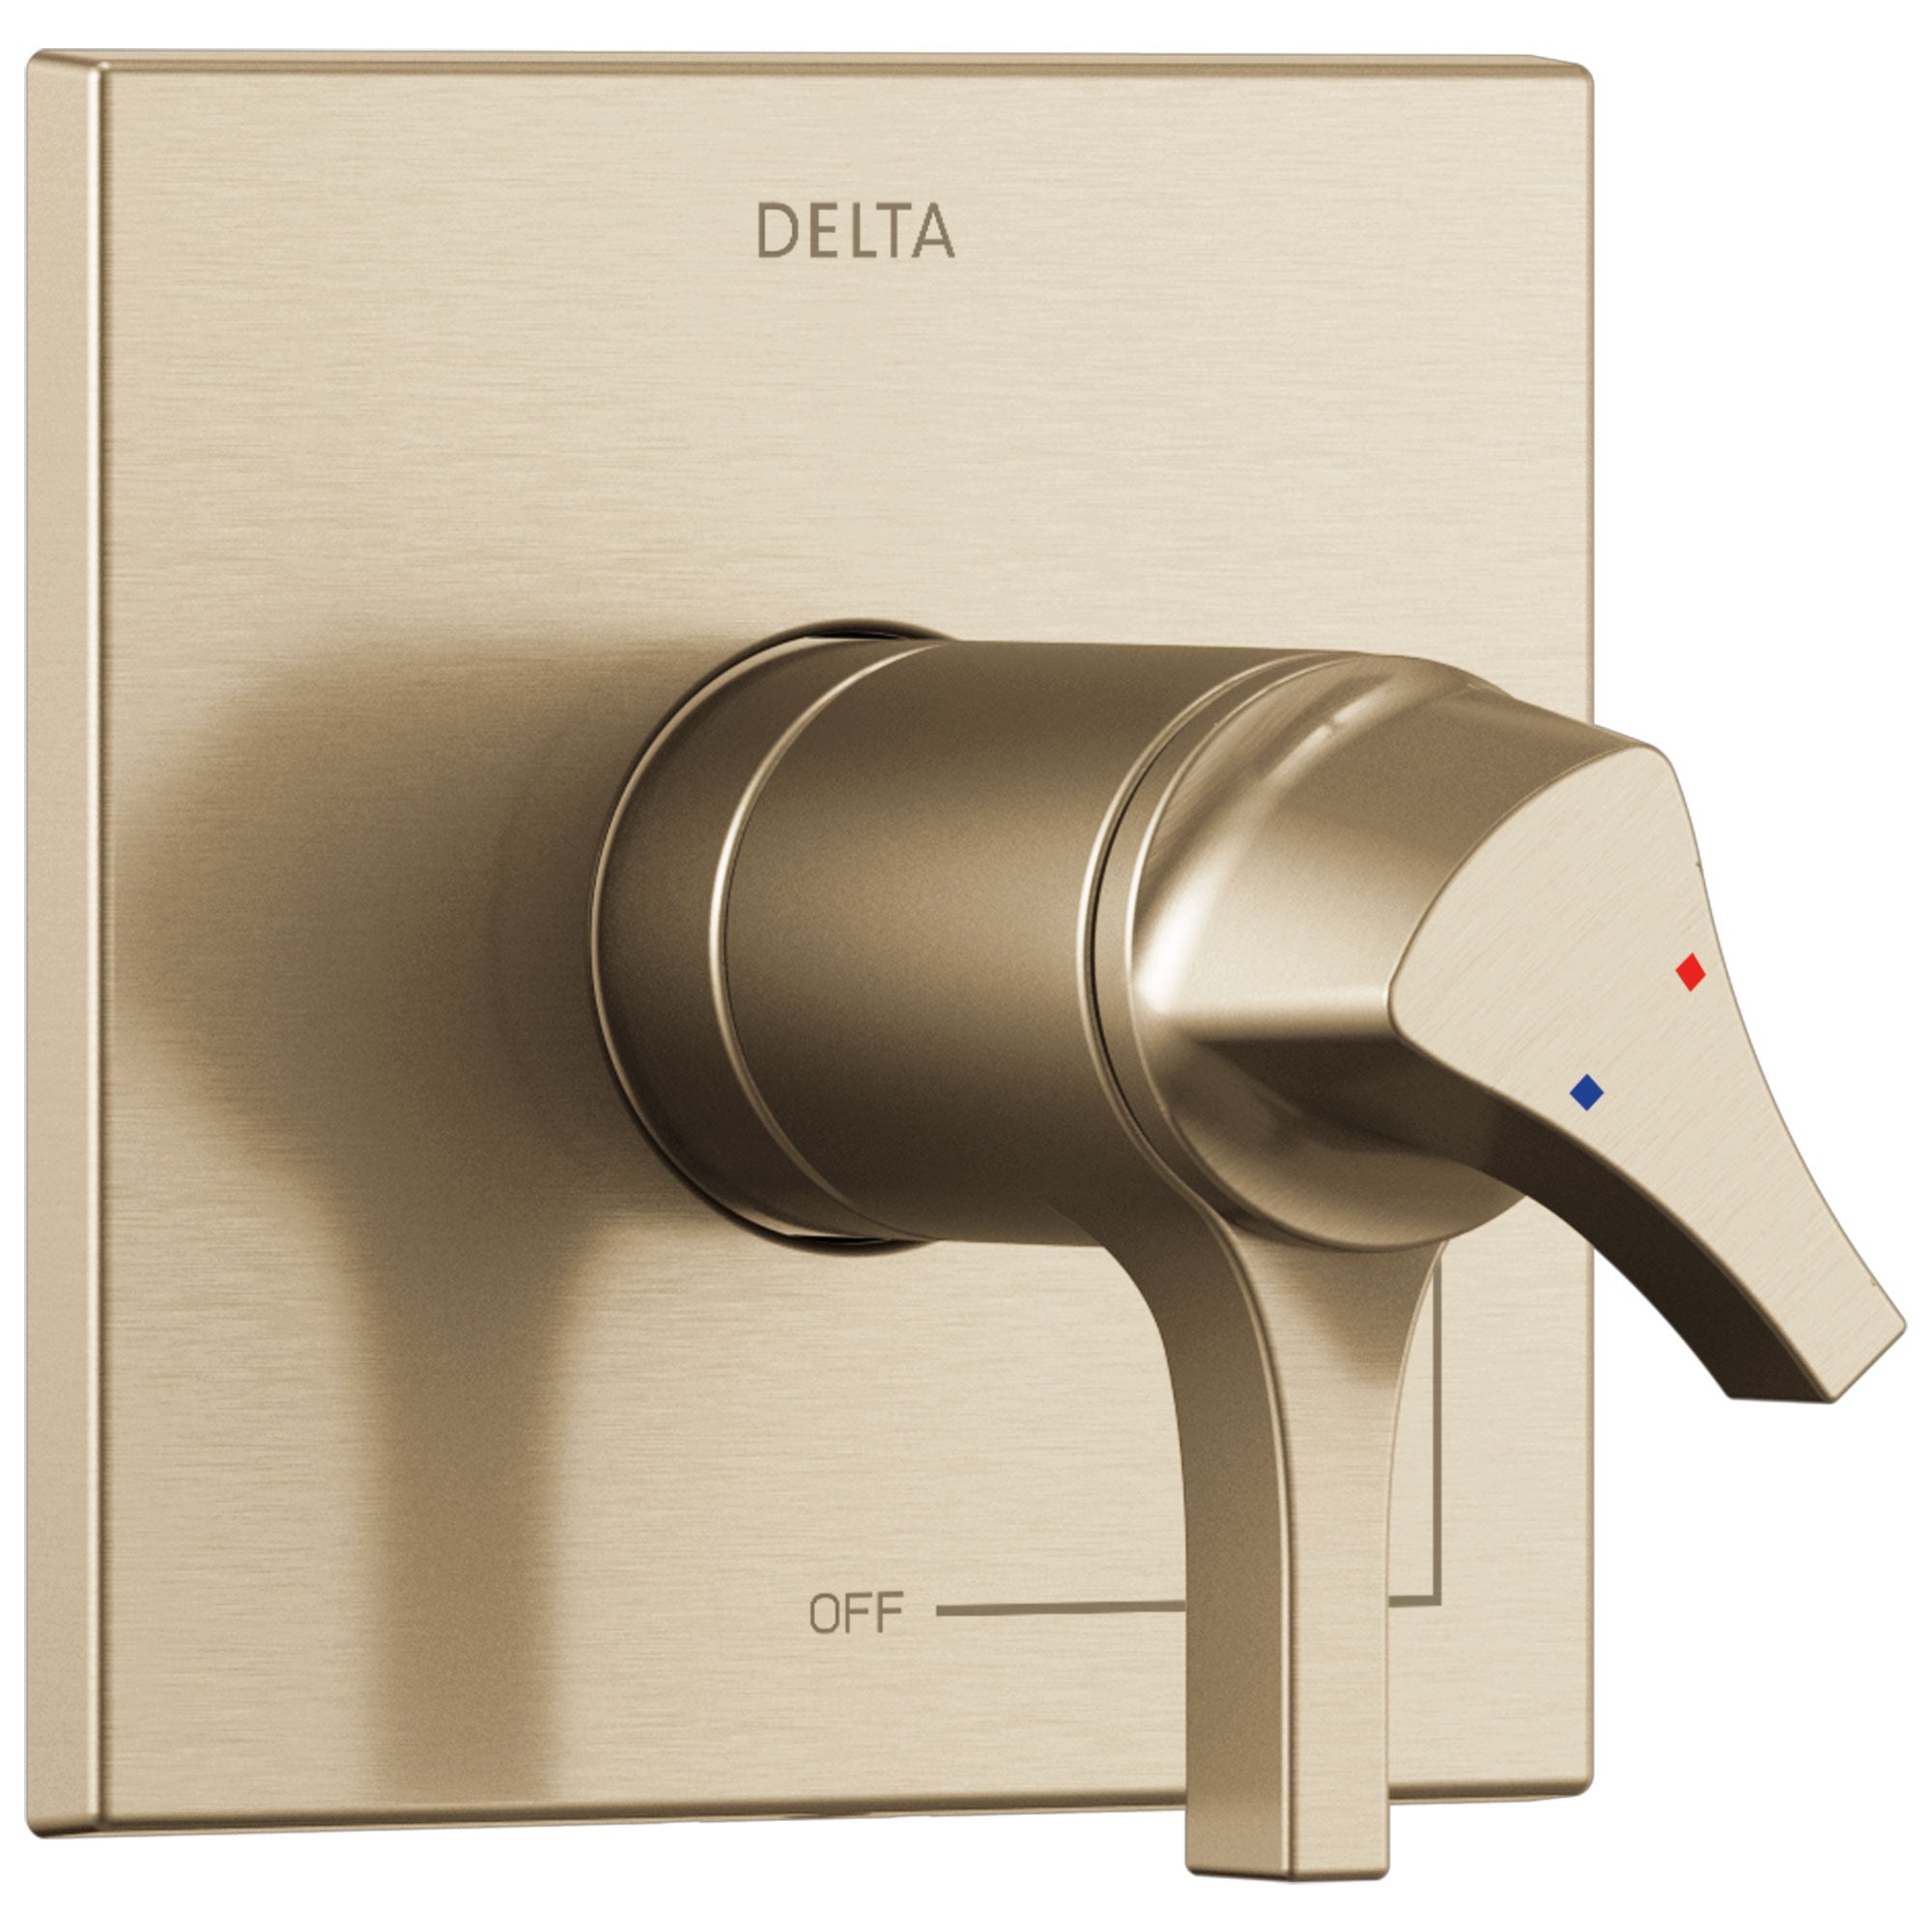 Delta Zura Champagne Bronze Finish Thermostatic Shower Faucet Control Only Includes 17T Cartridge, Handles, and Valve with Stops D3318V